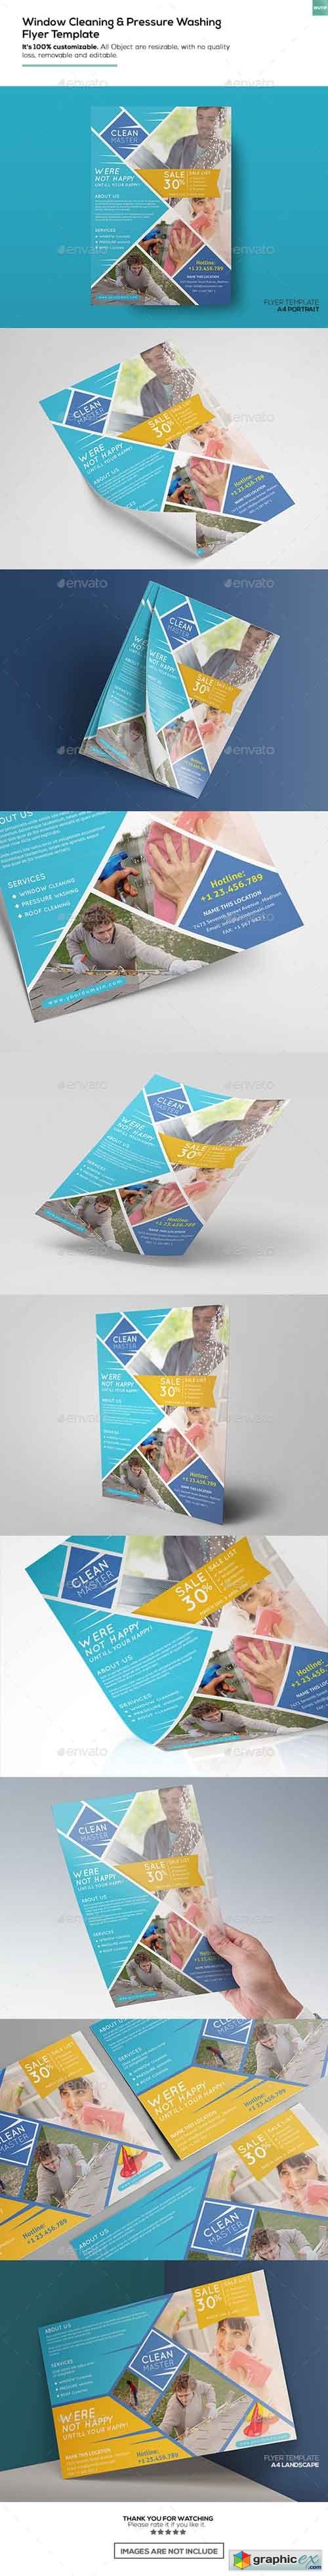 Window Cleaning & Pressure Washing/ Flyer Template